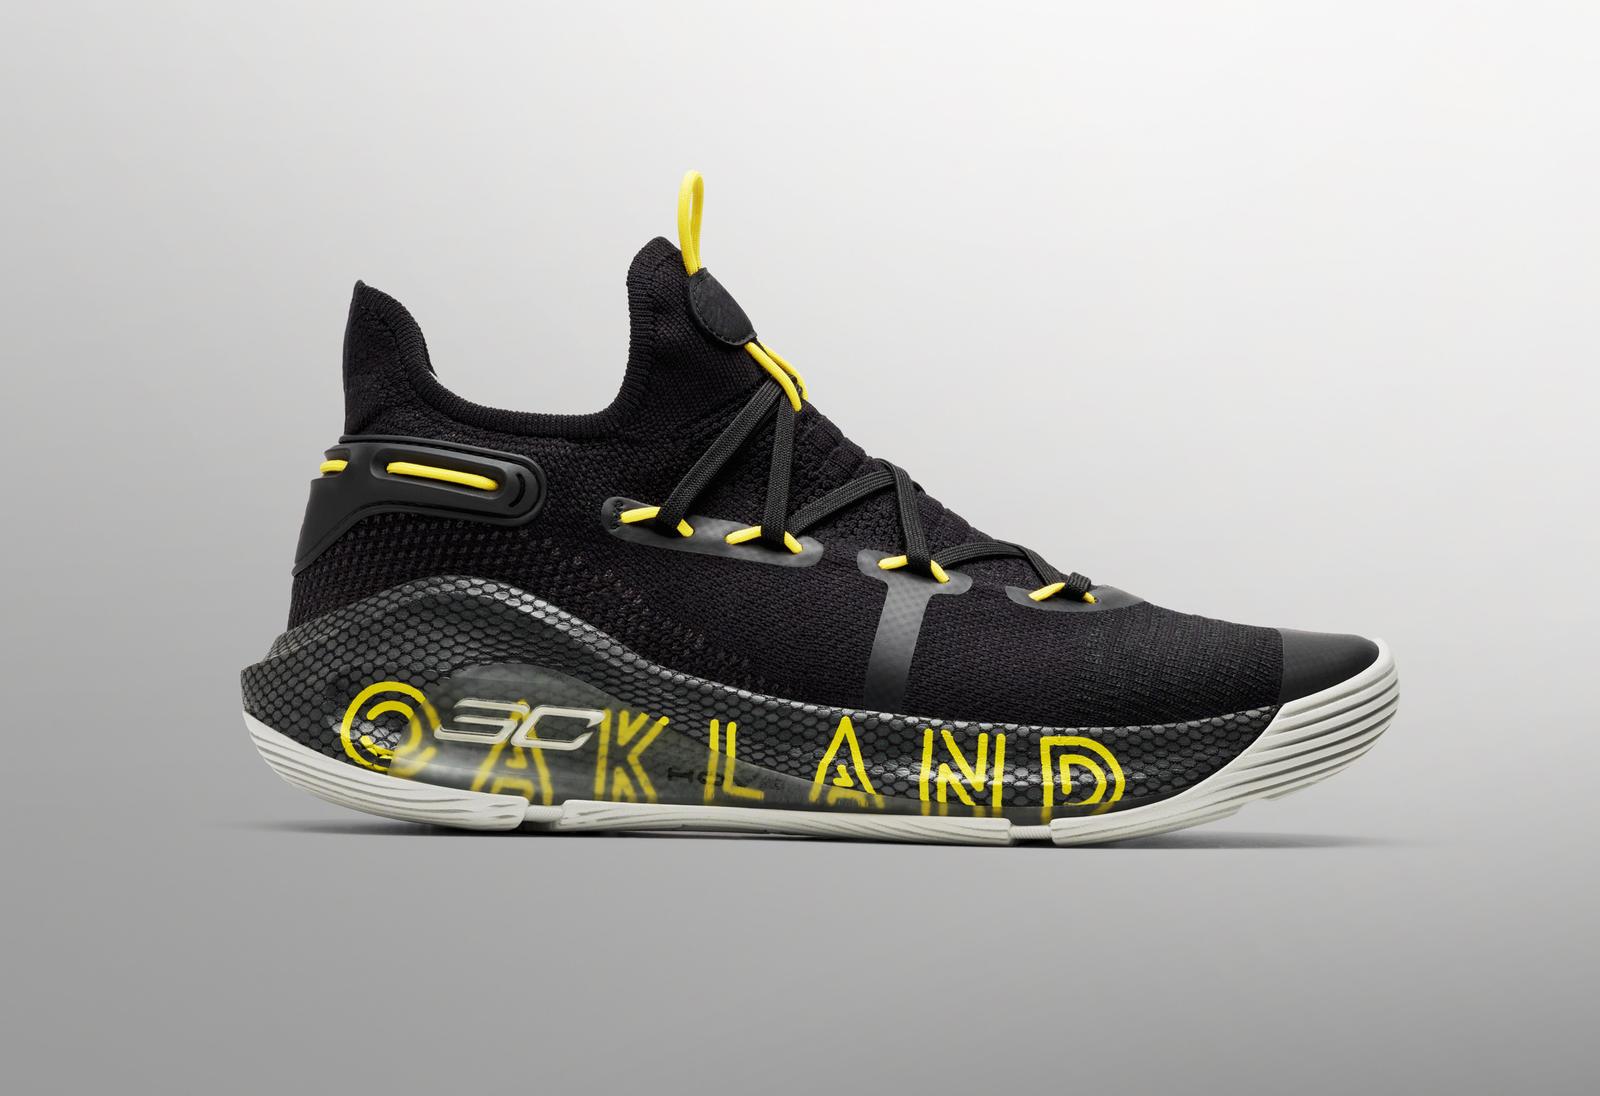 Introducing the Curry 6 Thank You, Oakland Colorway